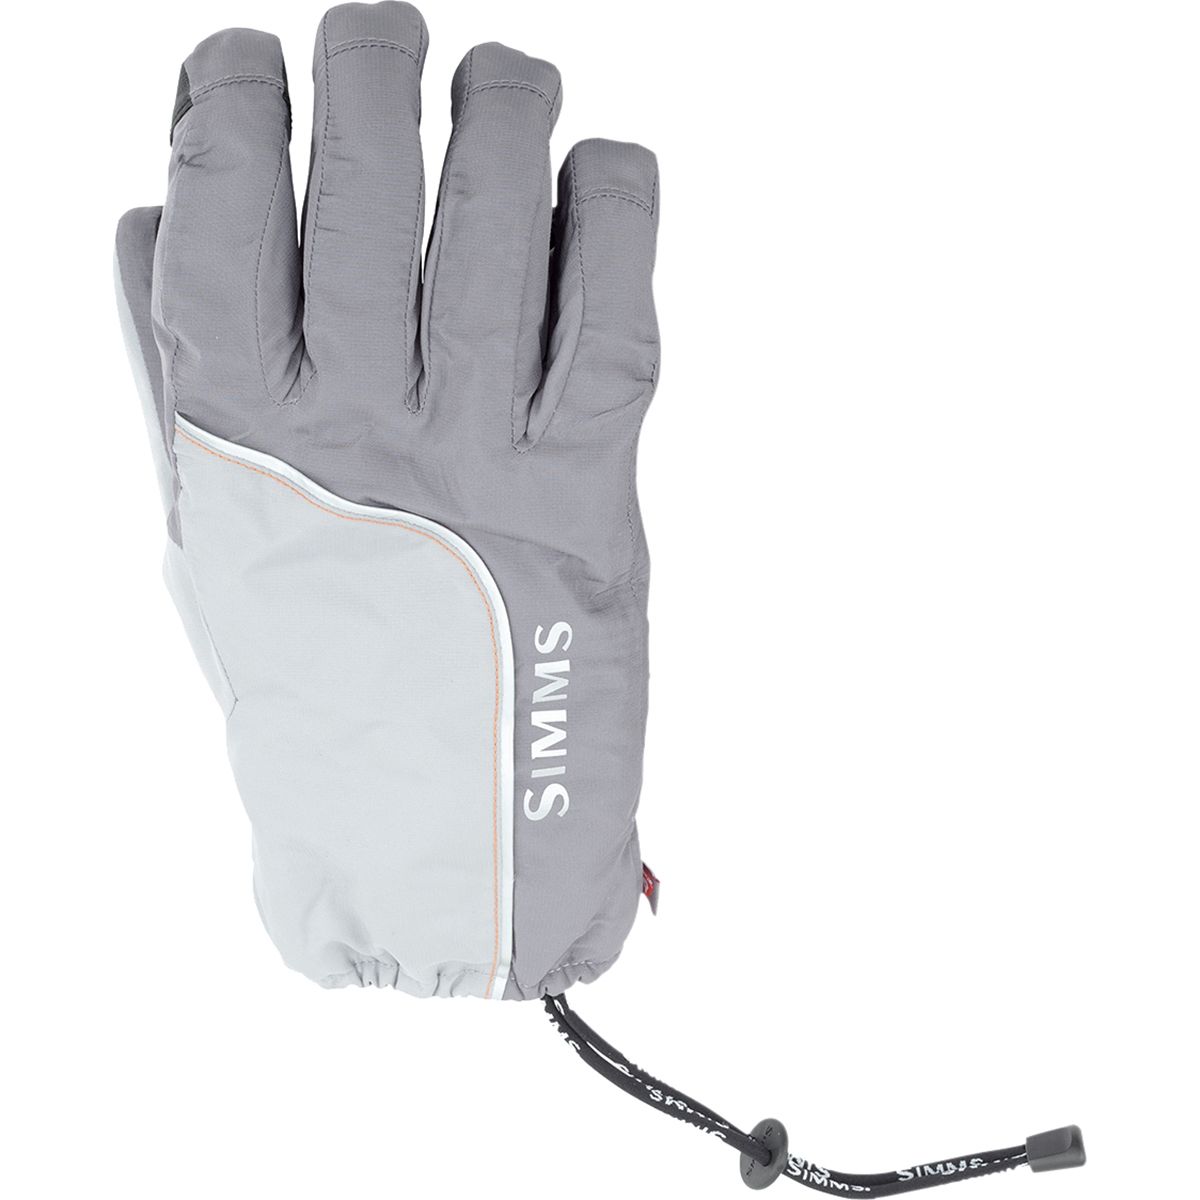 Simms Anvil Outdry Insulated Glove